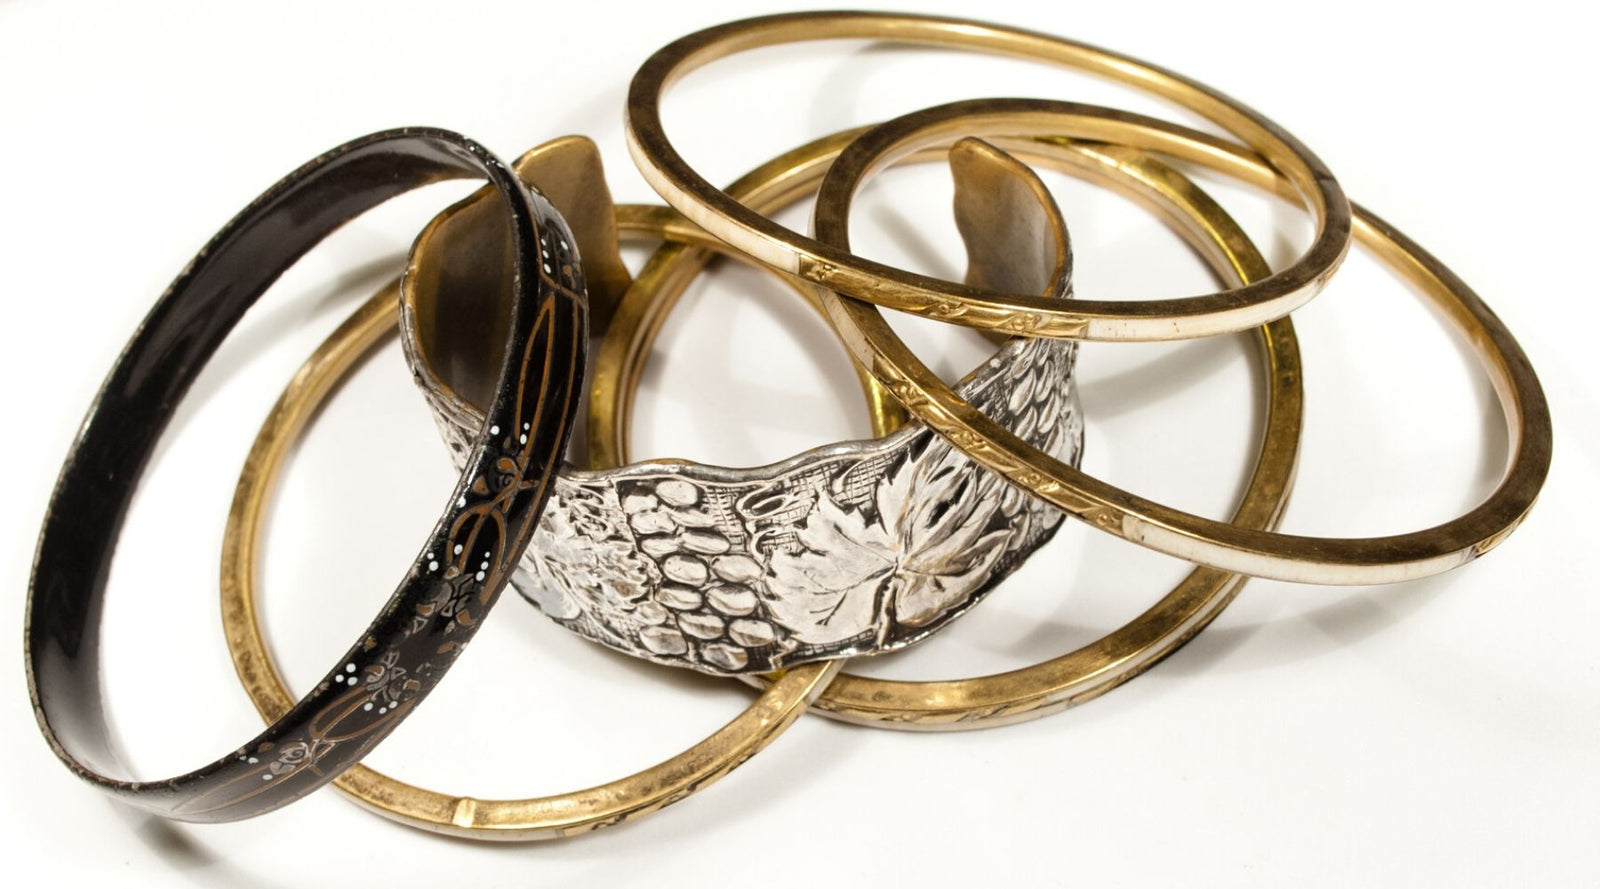 Brass Fashion Jewelry for Sale, Shop New & Pre-Owned Jewelry